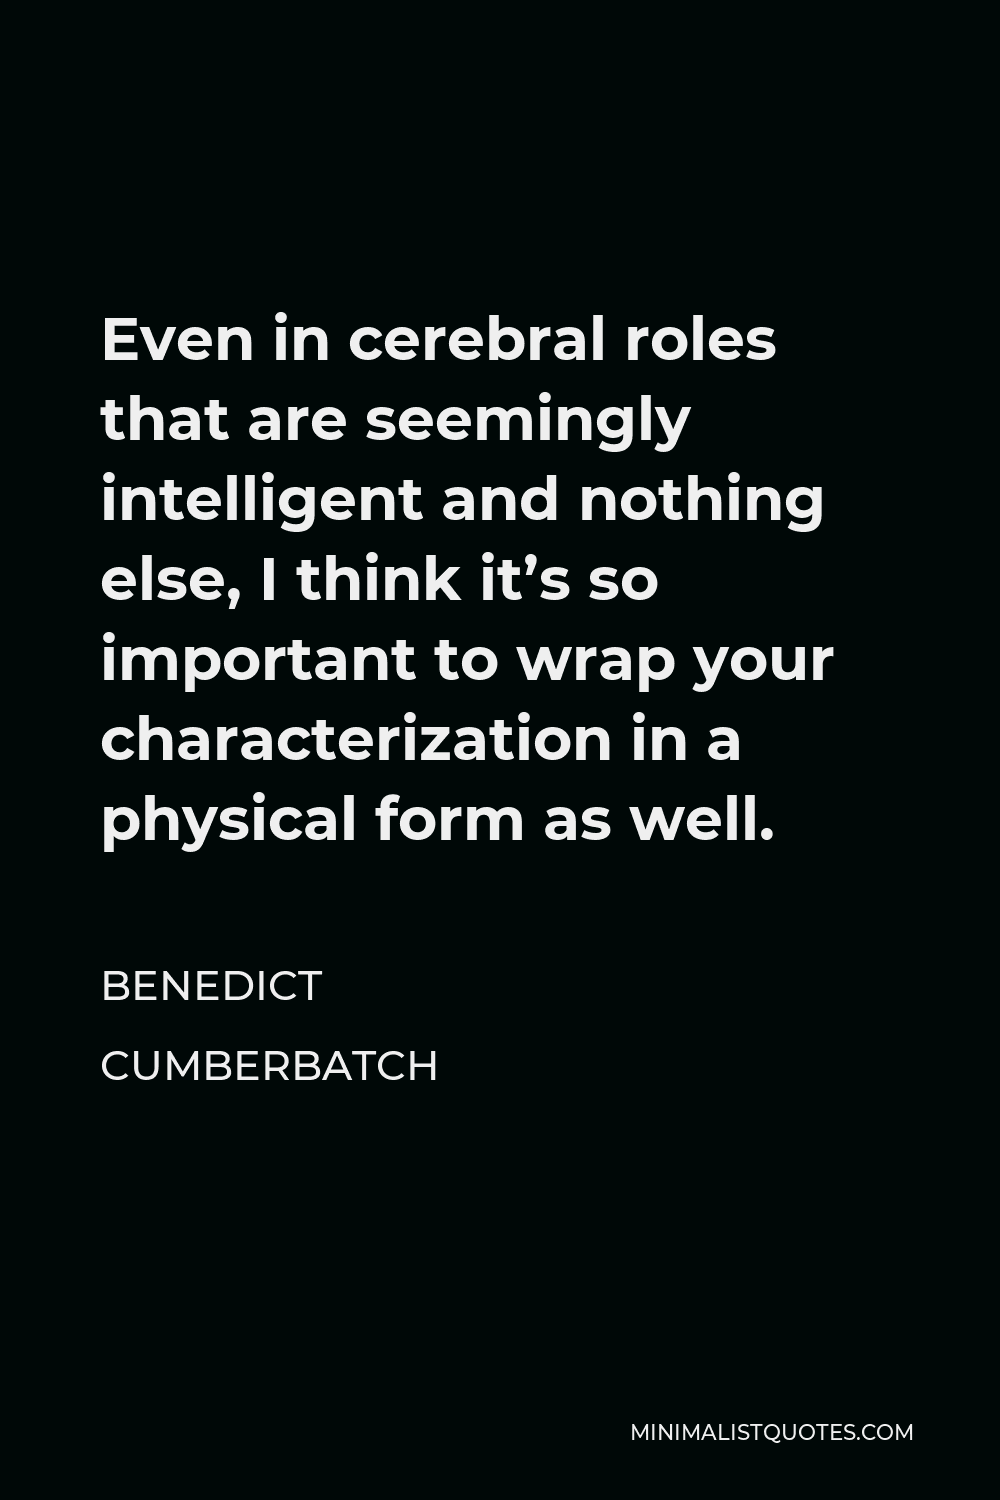 Benedict Cumberbatch Quote - Even in cerebral roles that are seemingly intelligent and nothing else, I think it’s so important to wrap your characterization in a physical form as well.